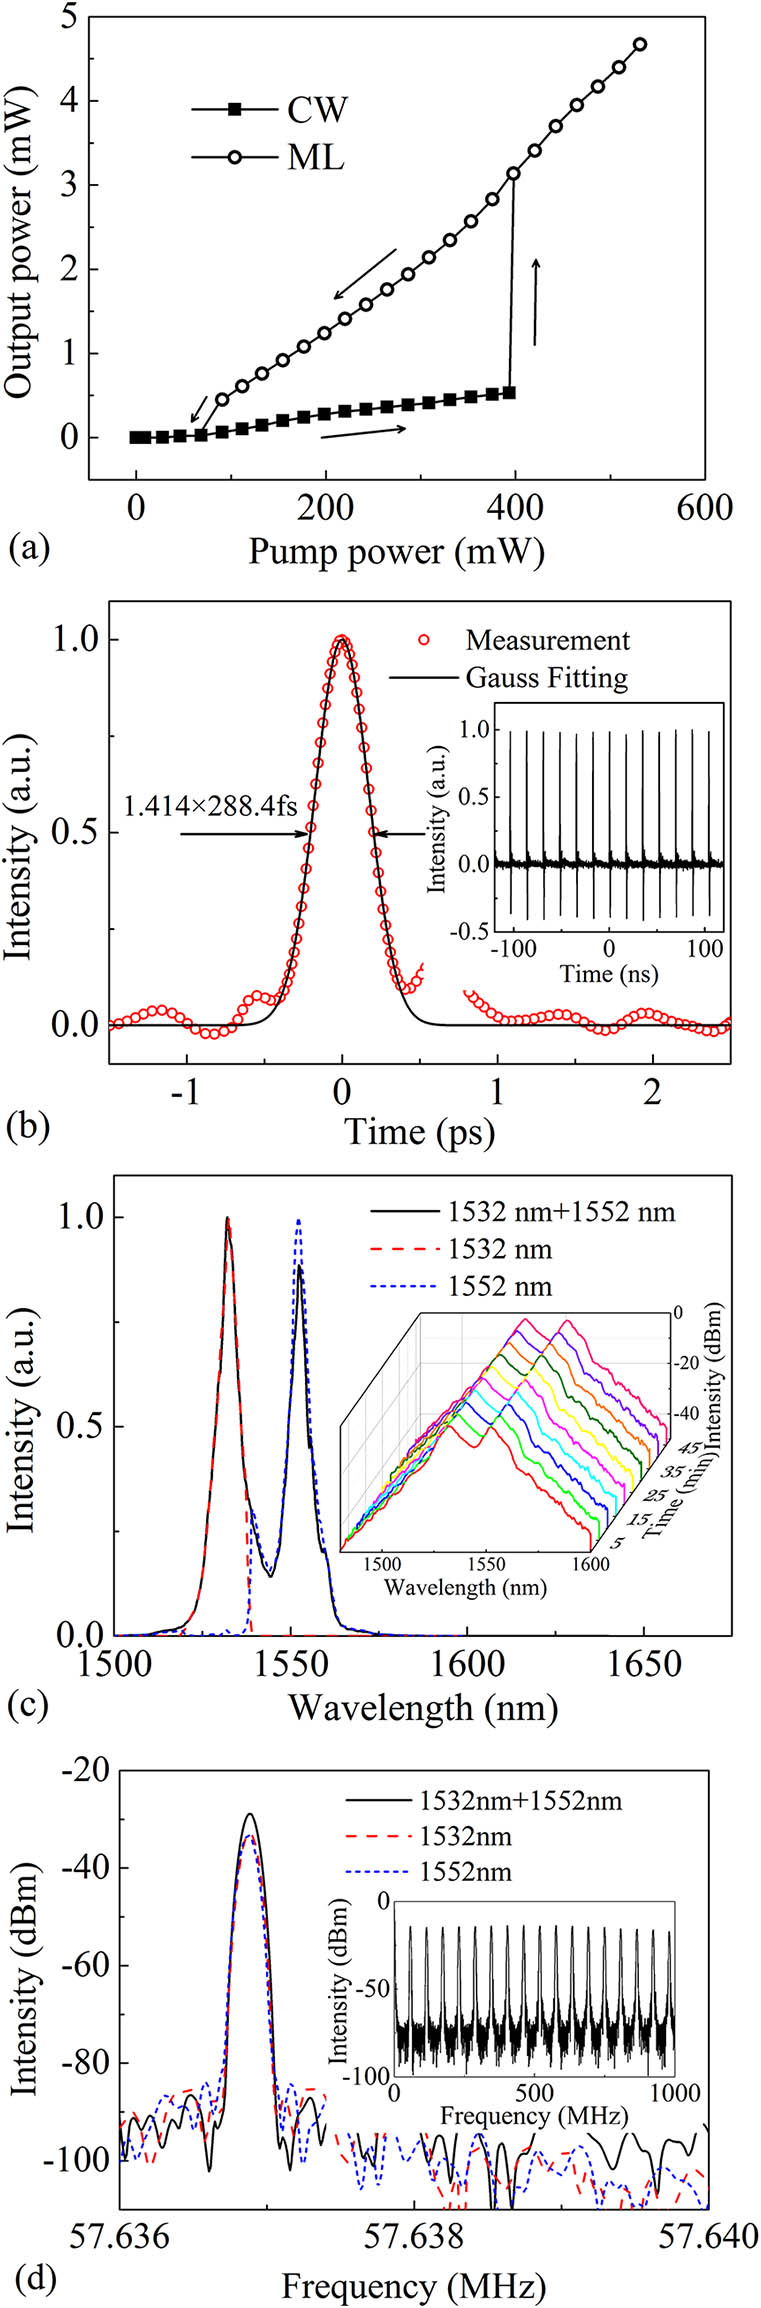 ML output of the dual-wavelength oscillator at the pump power of 530 mW. Experimentally observed ML (a) output power and operating status of the laser vs. the pump power, (b) autocorrelation trace (inset: pulse train), (c) spectra of dual-wavelength and each single wavelength (inset: spectra measured at a 5 min interval over 45 min), and (d) RF spectra of dual-wavelength and each single wavelength (inset: RF spectrum measured in the 1 GHz range).